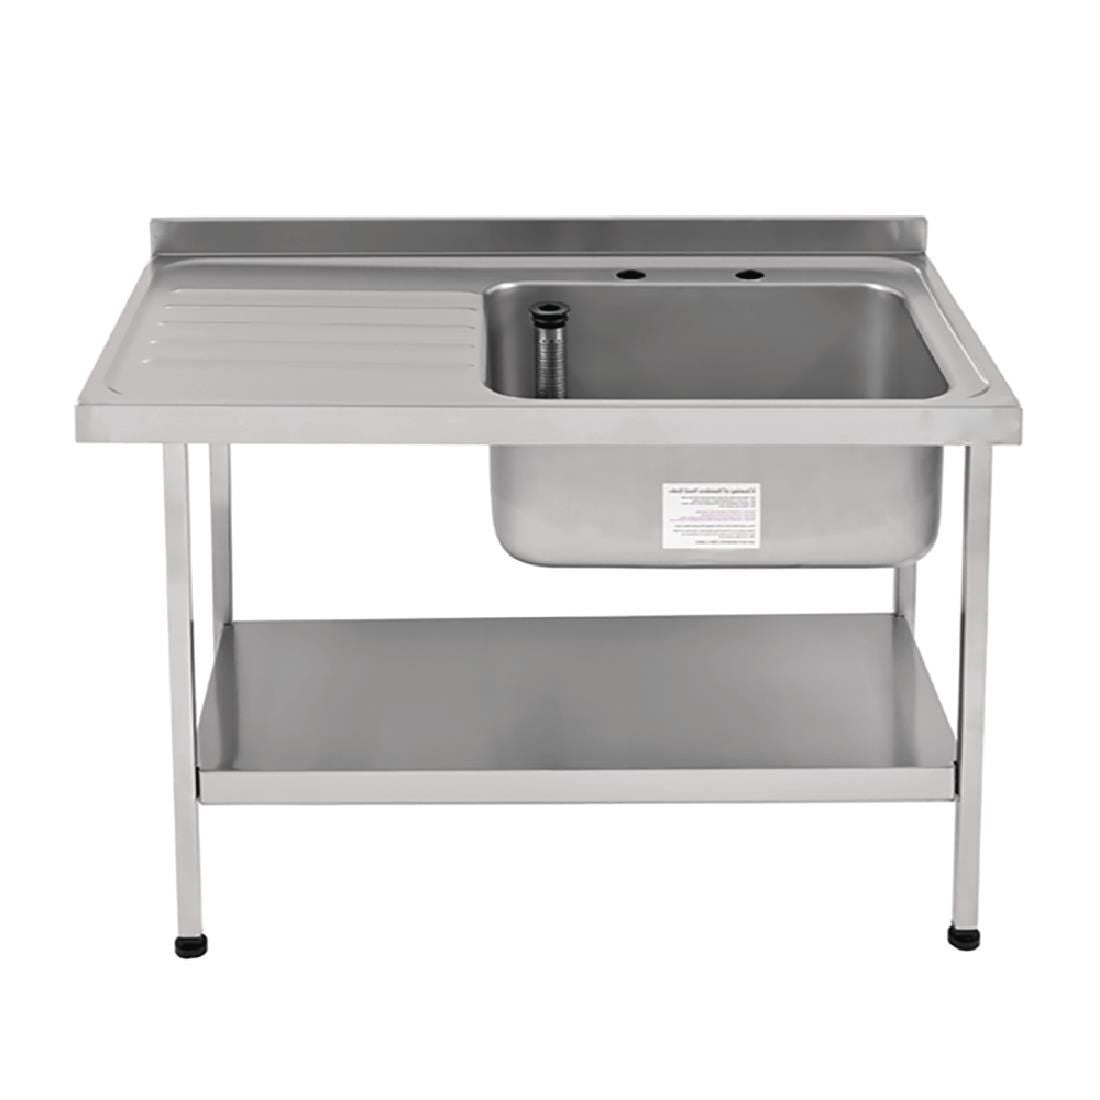 Franke Self Assembly Stainless Steel Sink Right Hand Bowl 1200x 650mm - P366